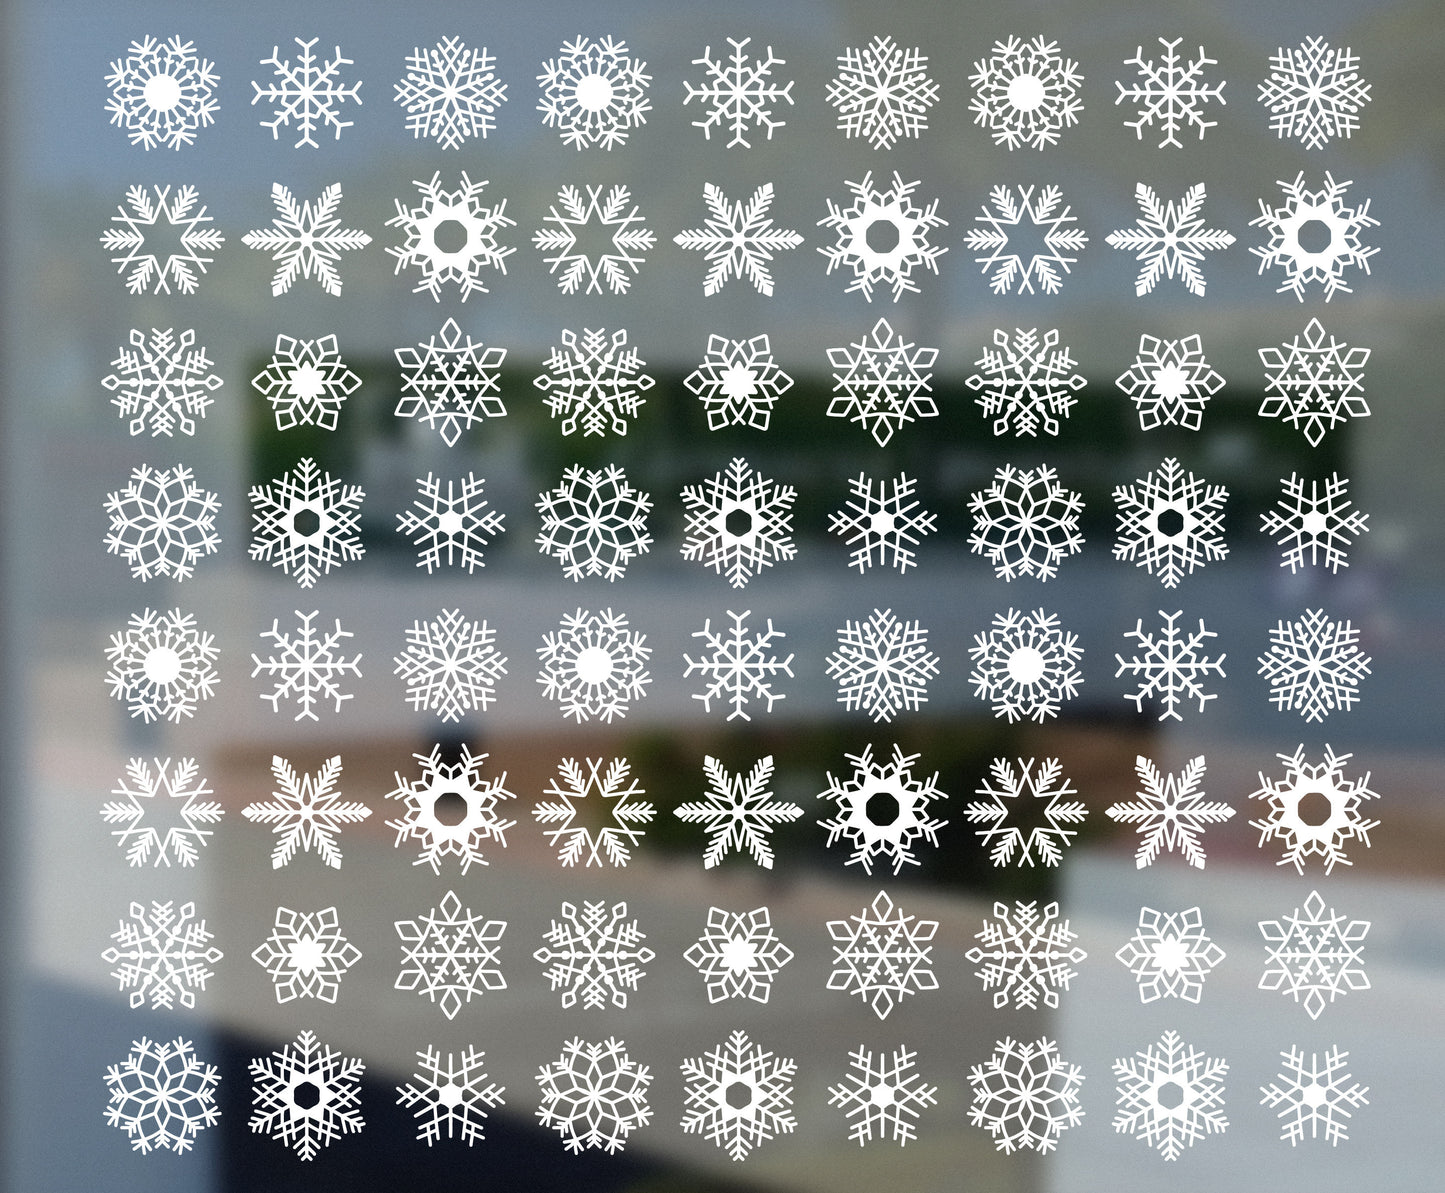 Snowflakes Window Stickers 72 Pack | 4.5 cm Snowflakes Decals Christmas Window Decor